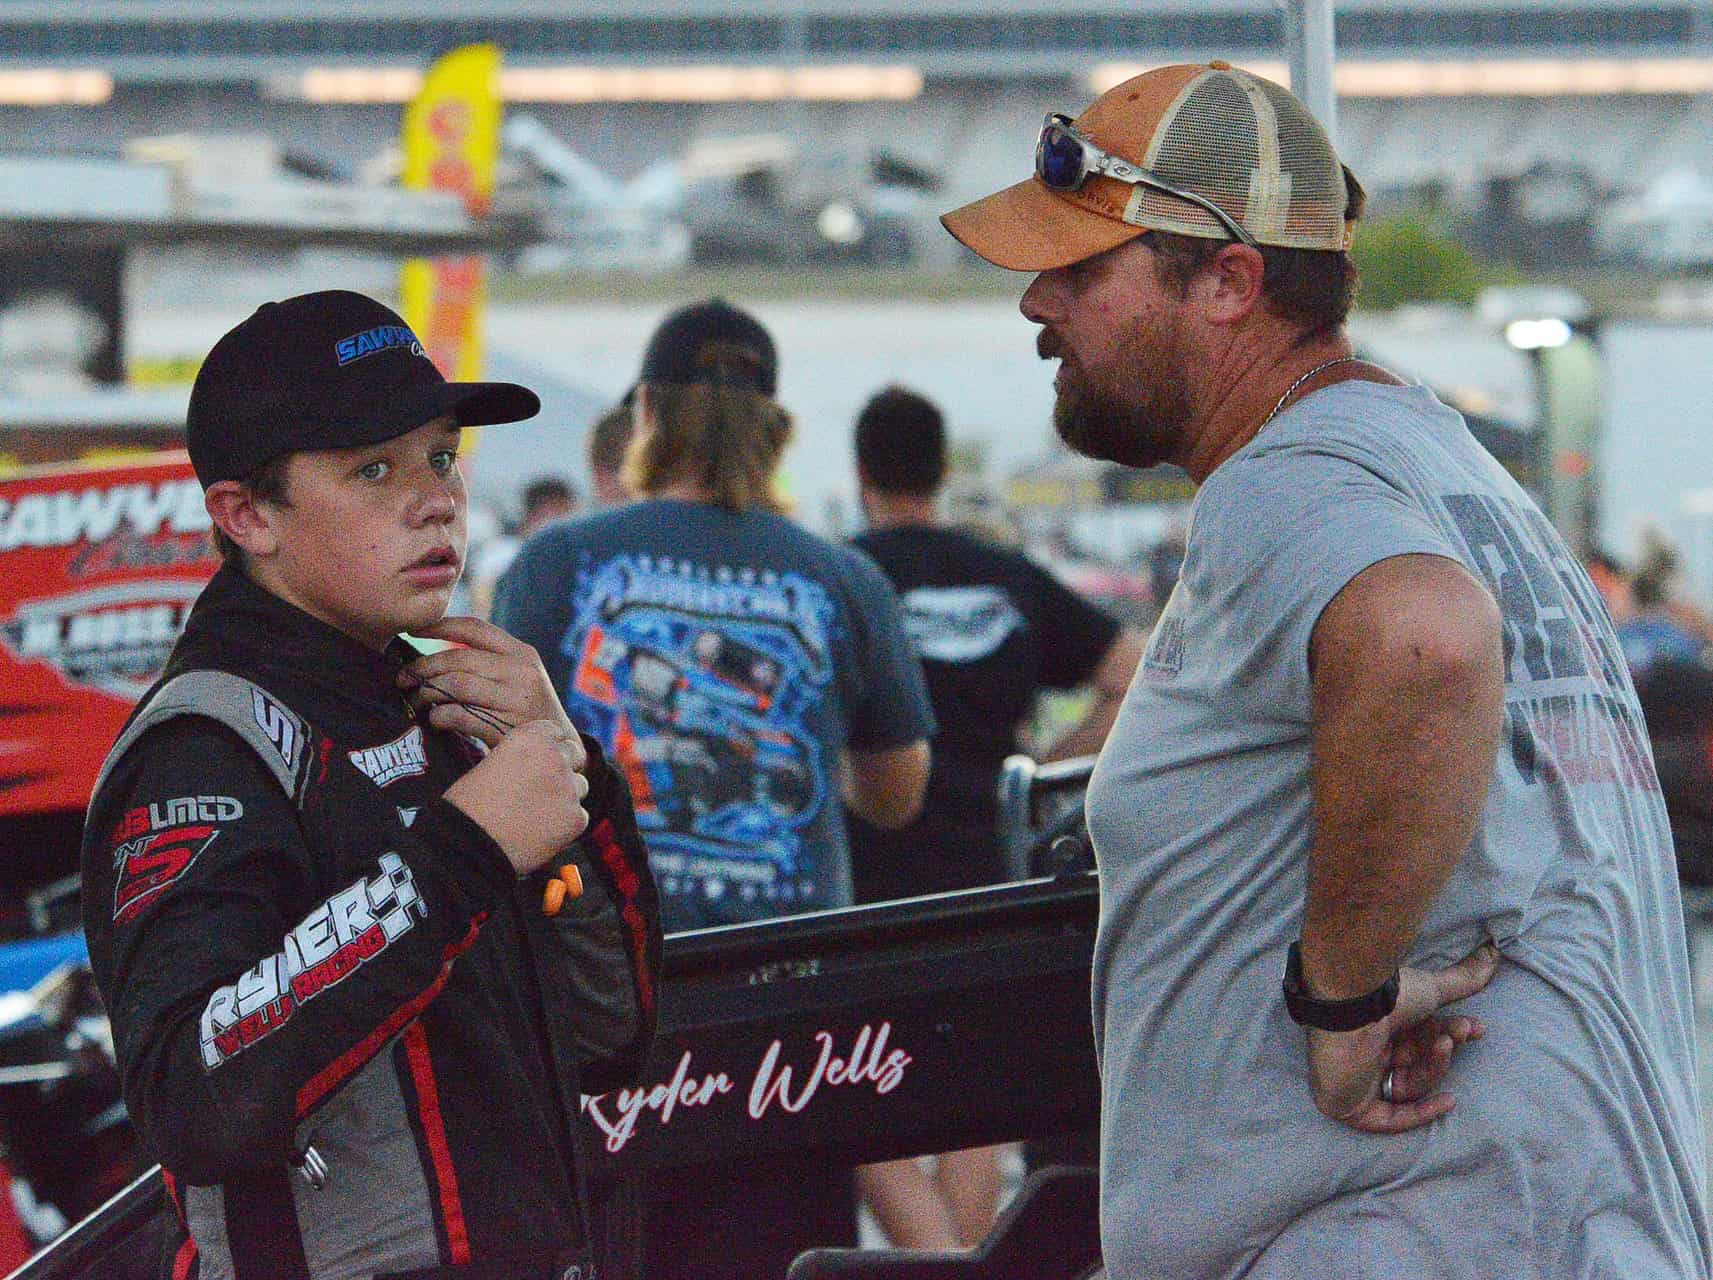 Ryder wells talks with his dad/crew chief about how his car handled during the race. Photo by jerry jordan/kickin' the tires